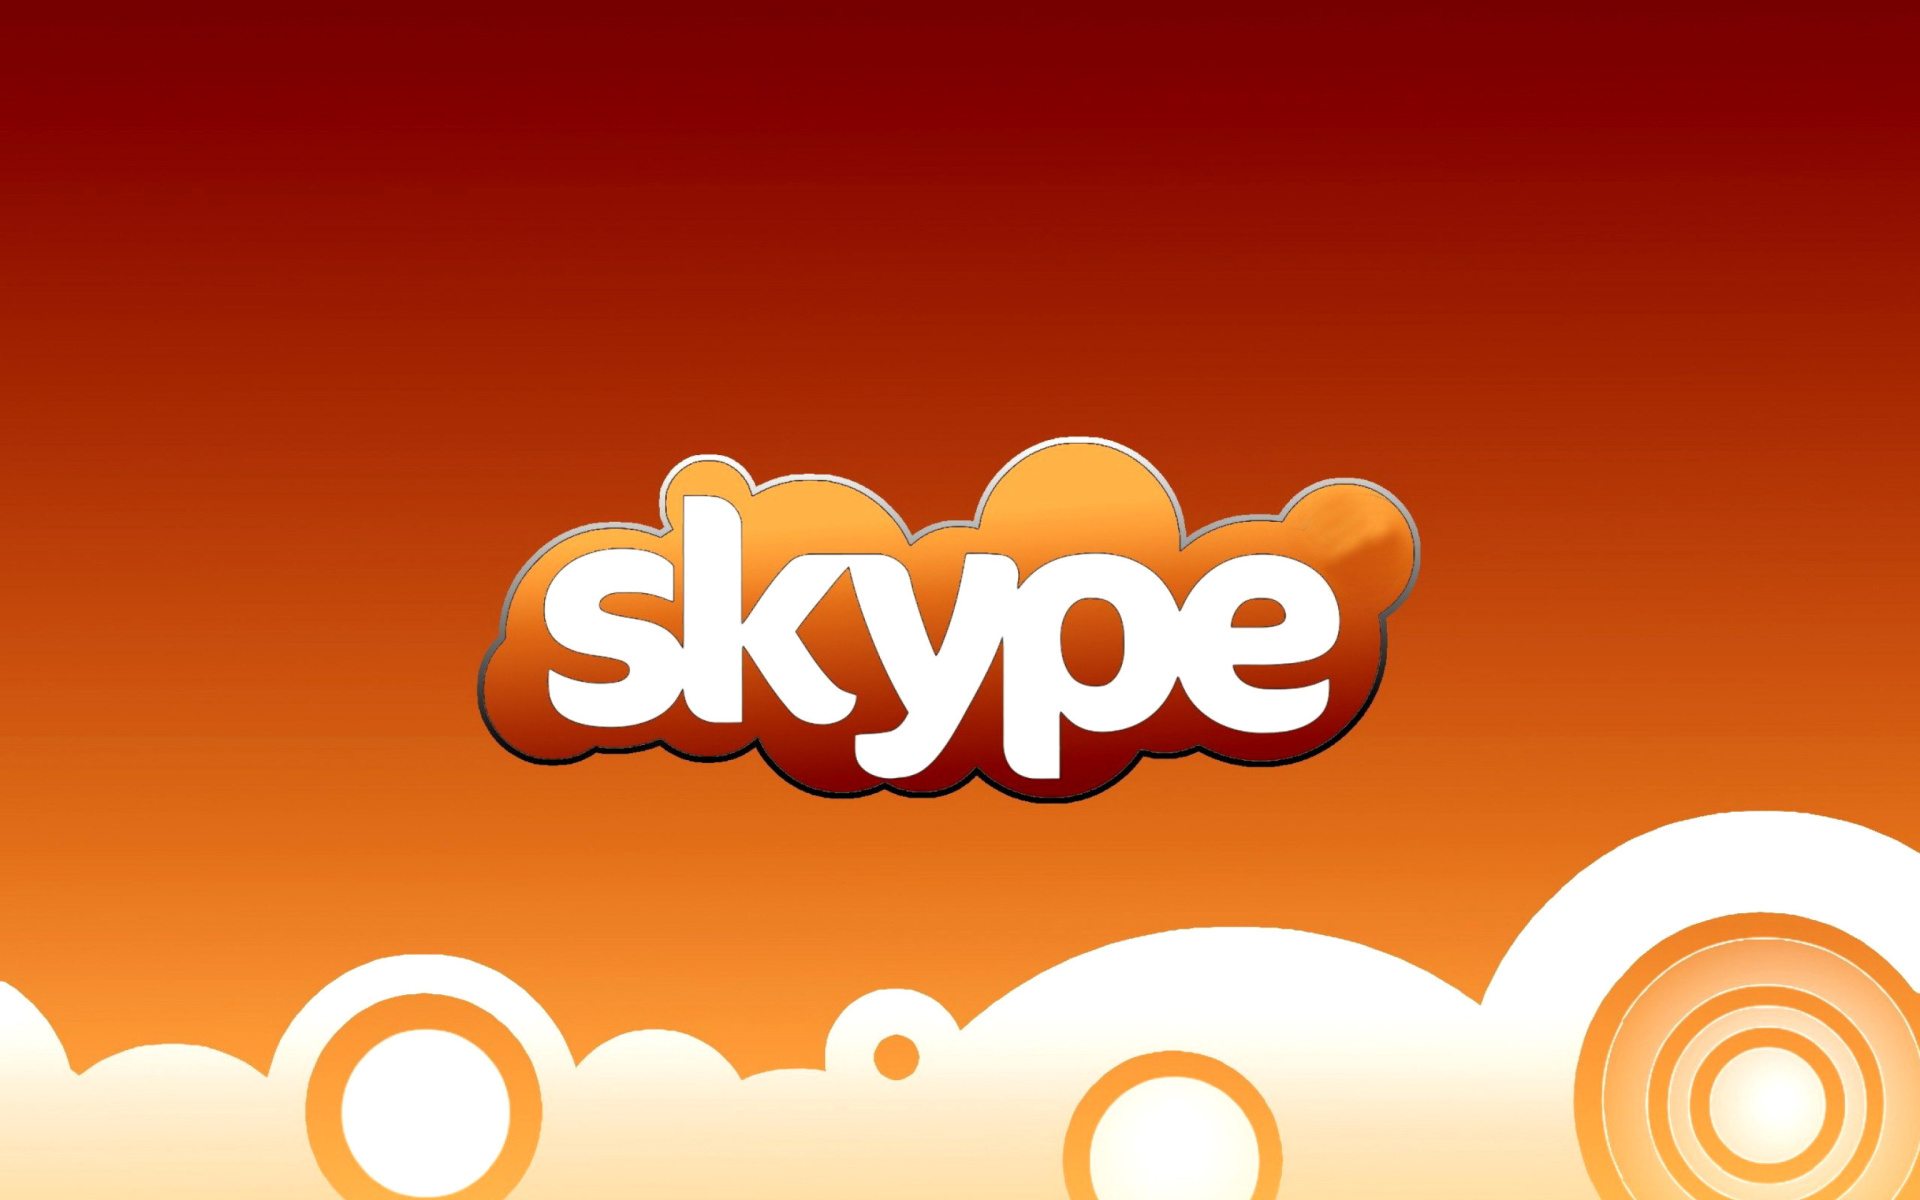 Skype for calls and chat screenshot #1 1920x1200